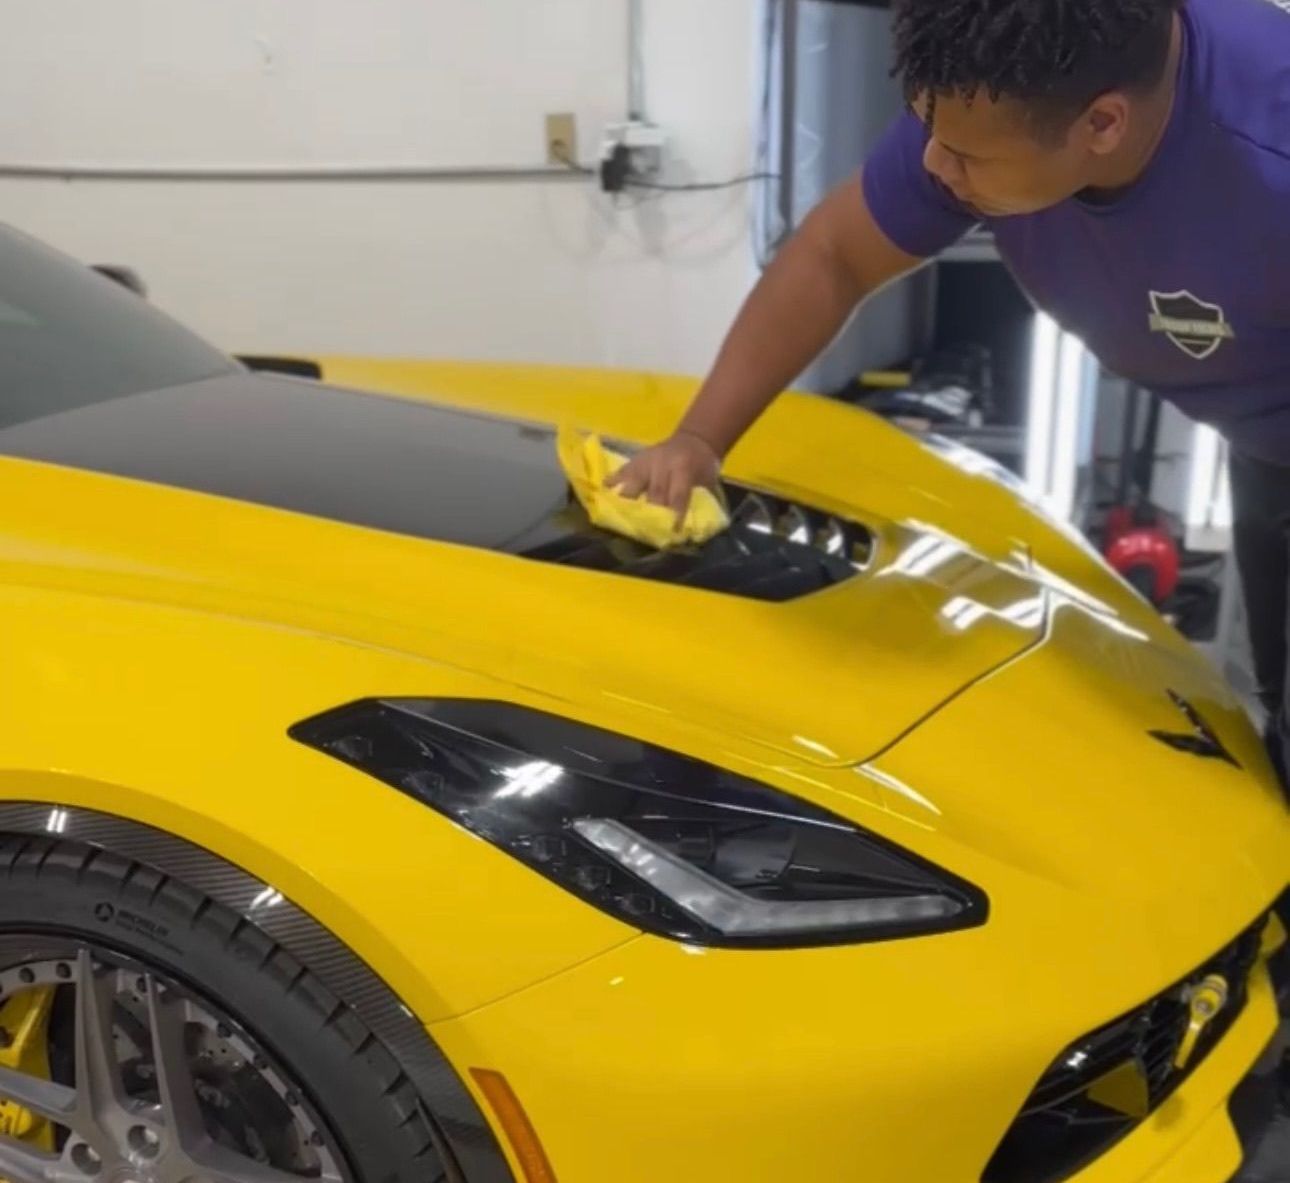 a man in a purple shirt is cleaning a yellow sports car